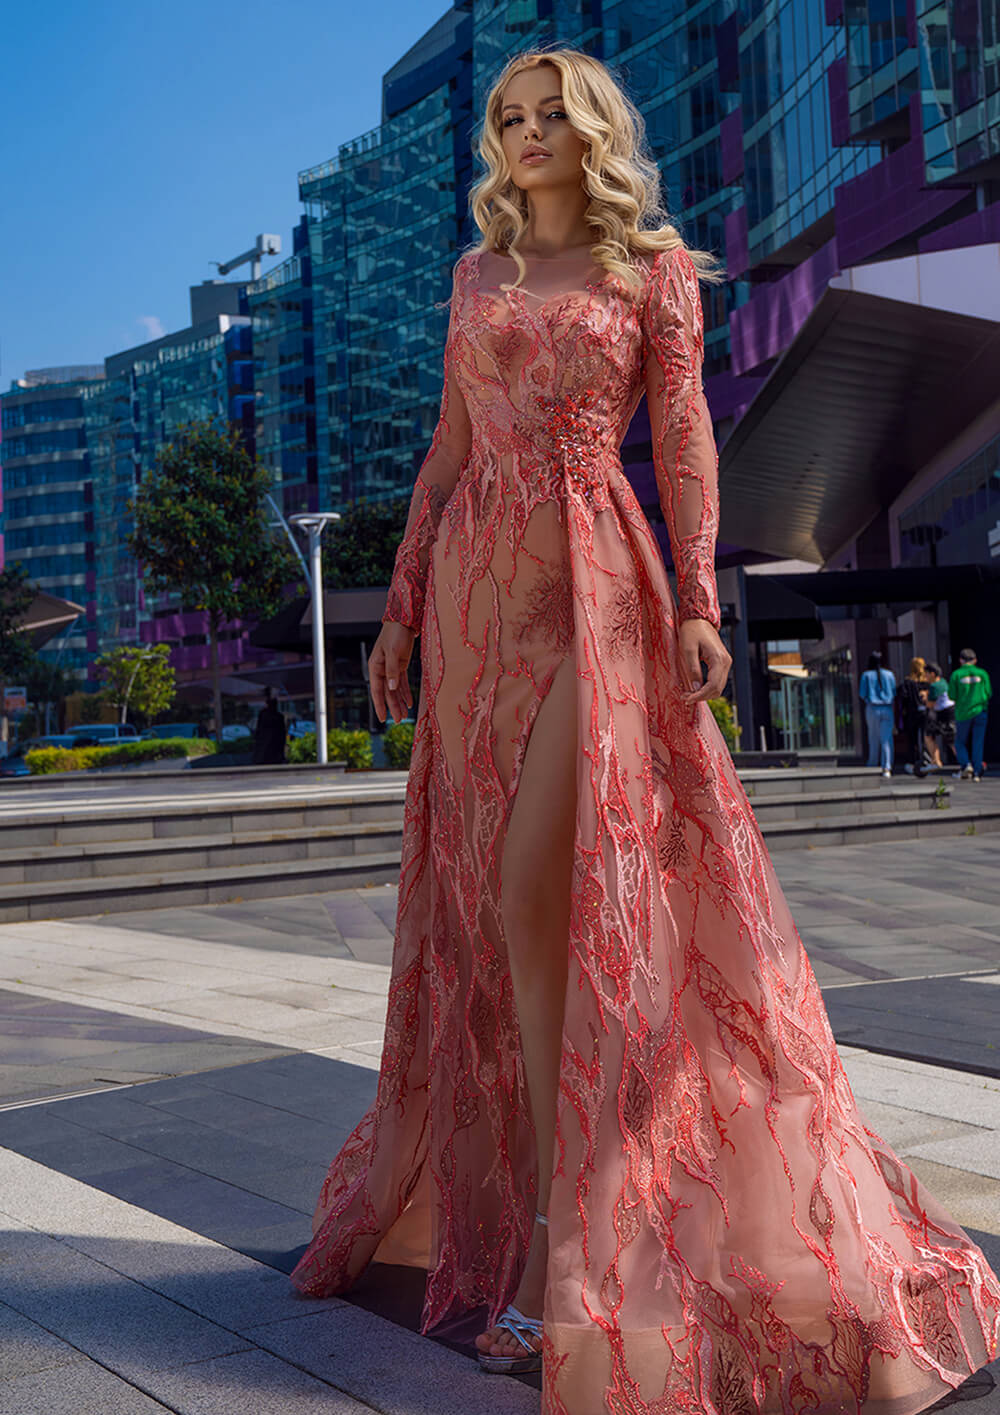 Long sleeves patterned evening dress with side slit